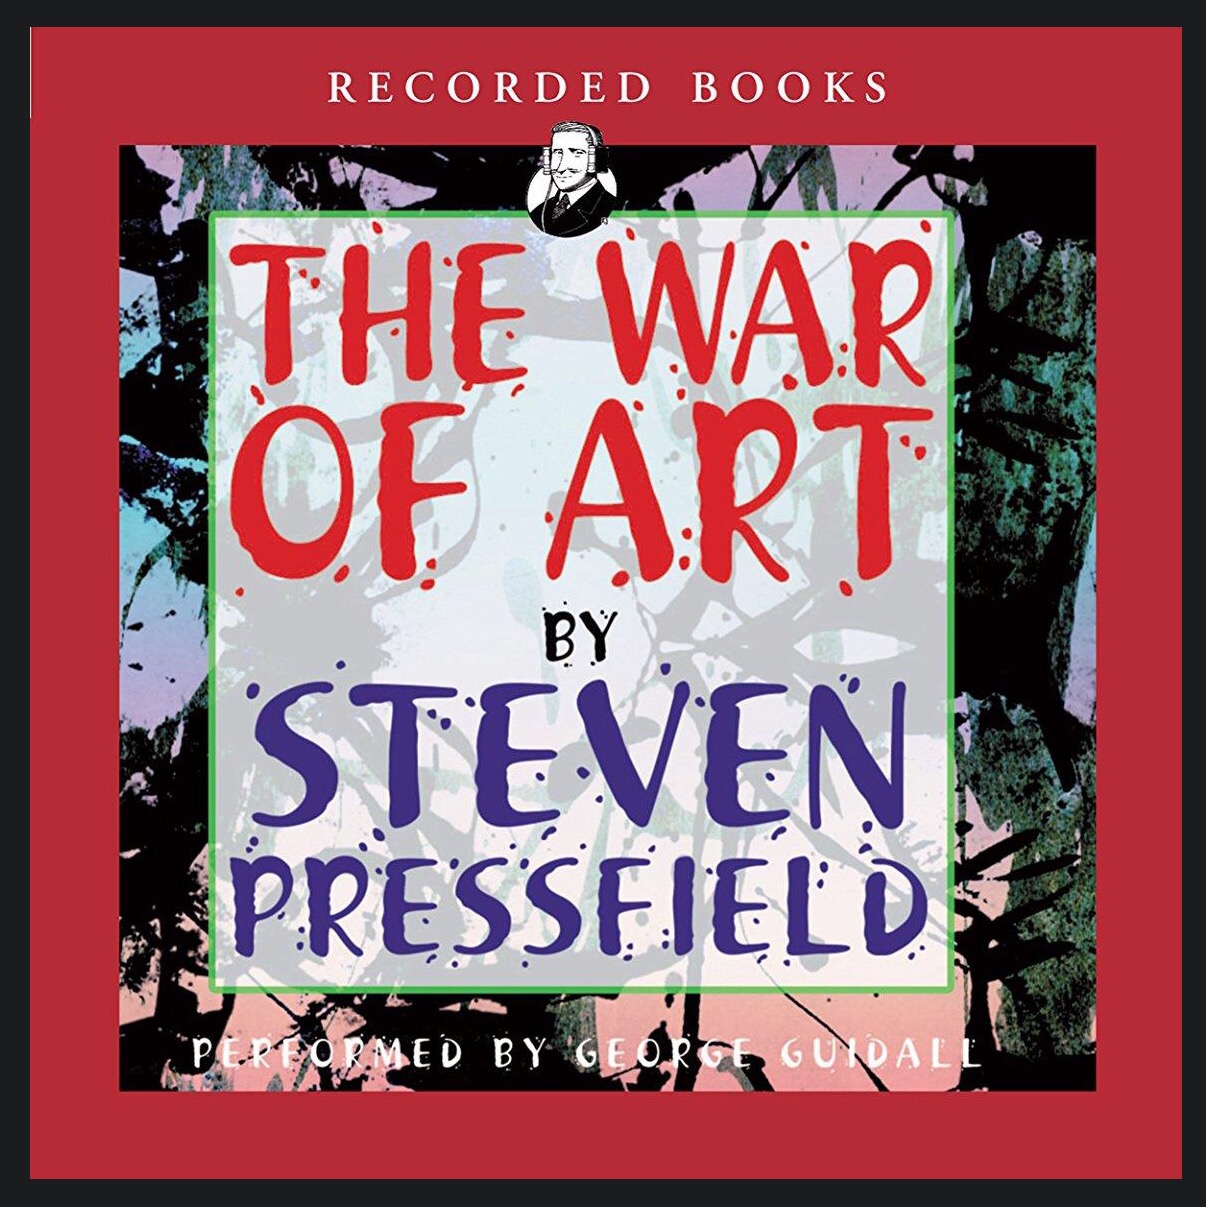 Book Summary: Do The Work by Steven Pressfield